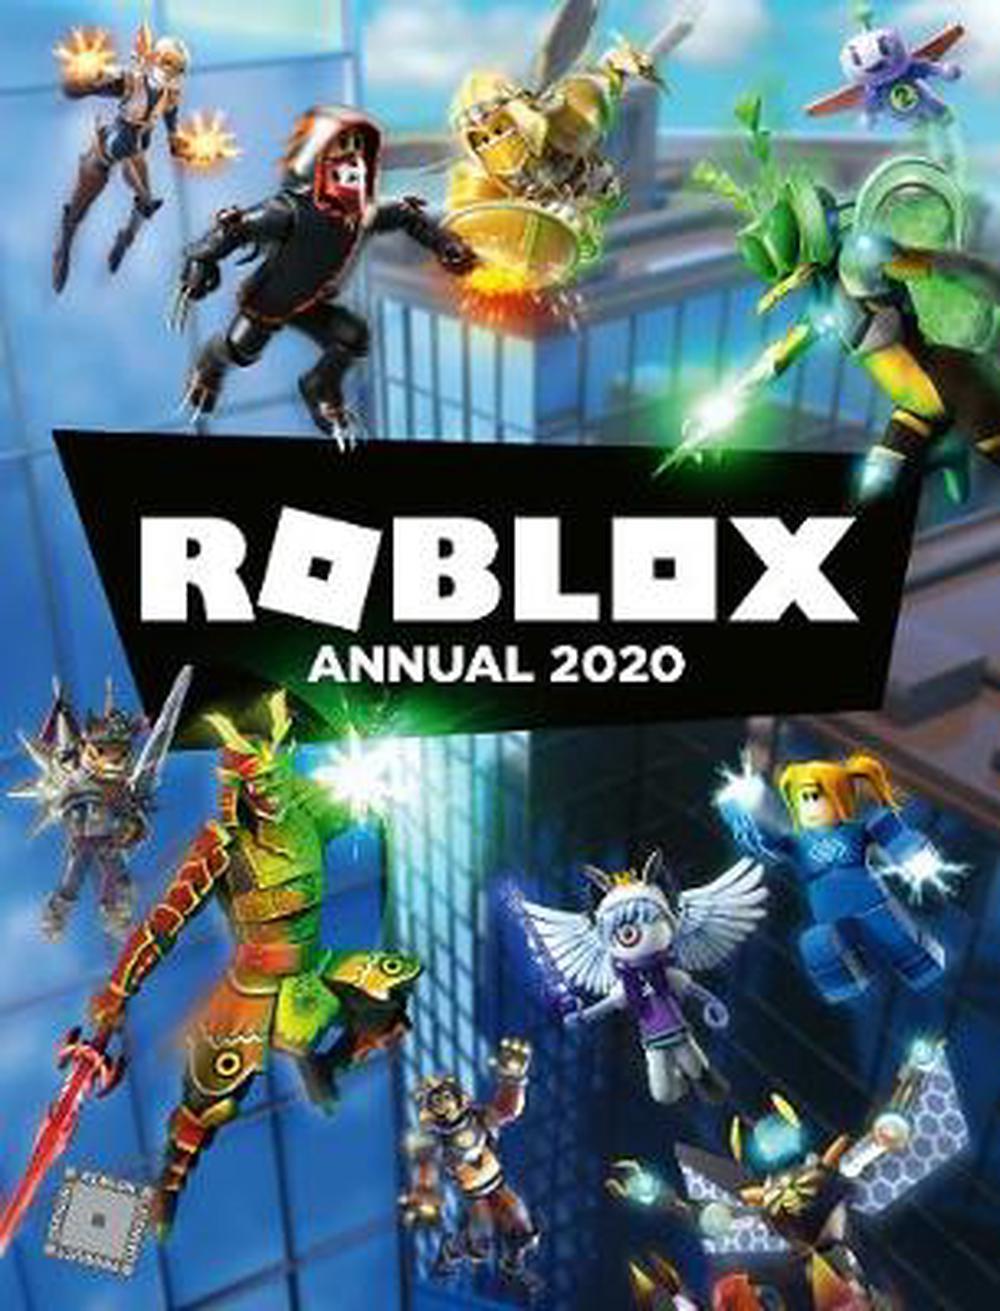 Roblox Annual 2020 By Roblox Hardcover 9781405294454 Buy - roblox kids tv movie video game action figure playsets for sale